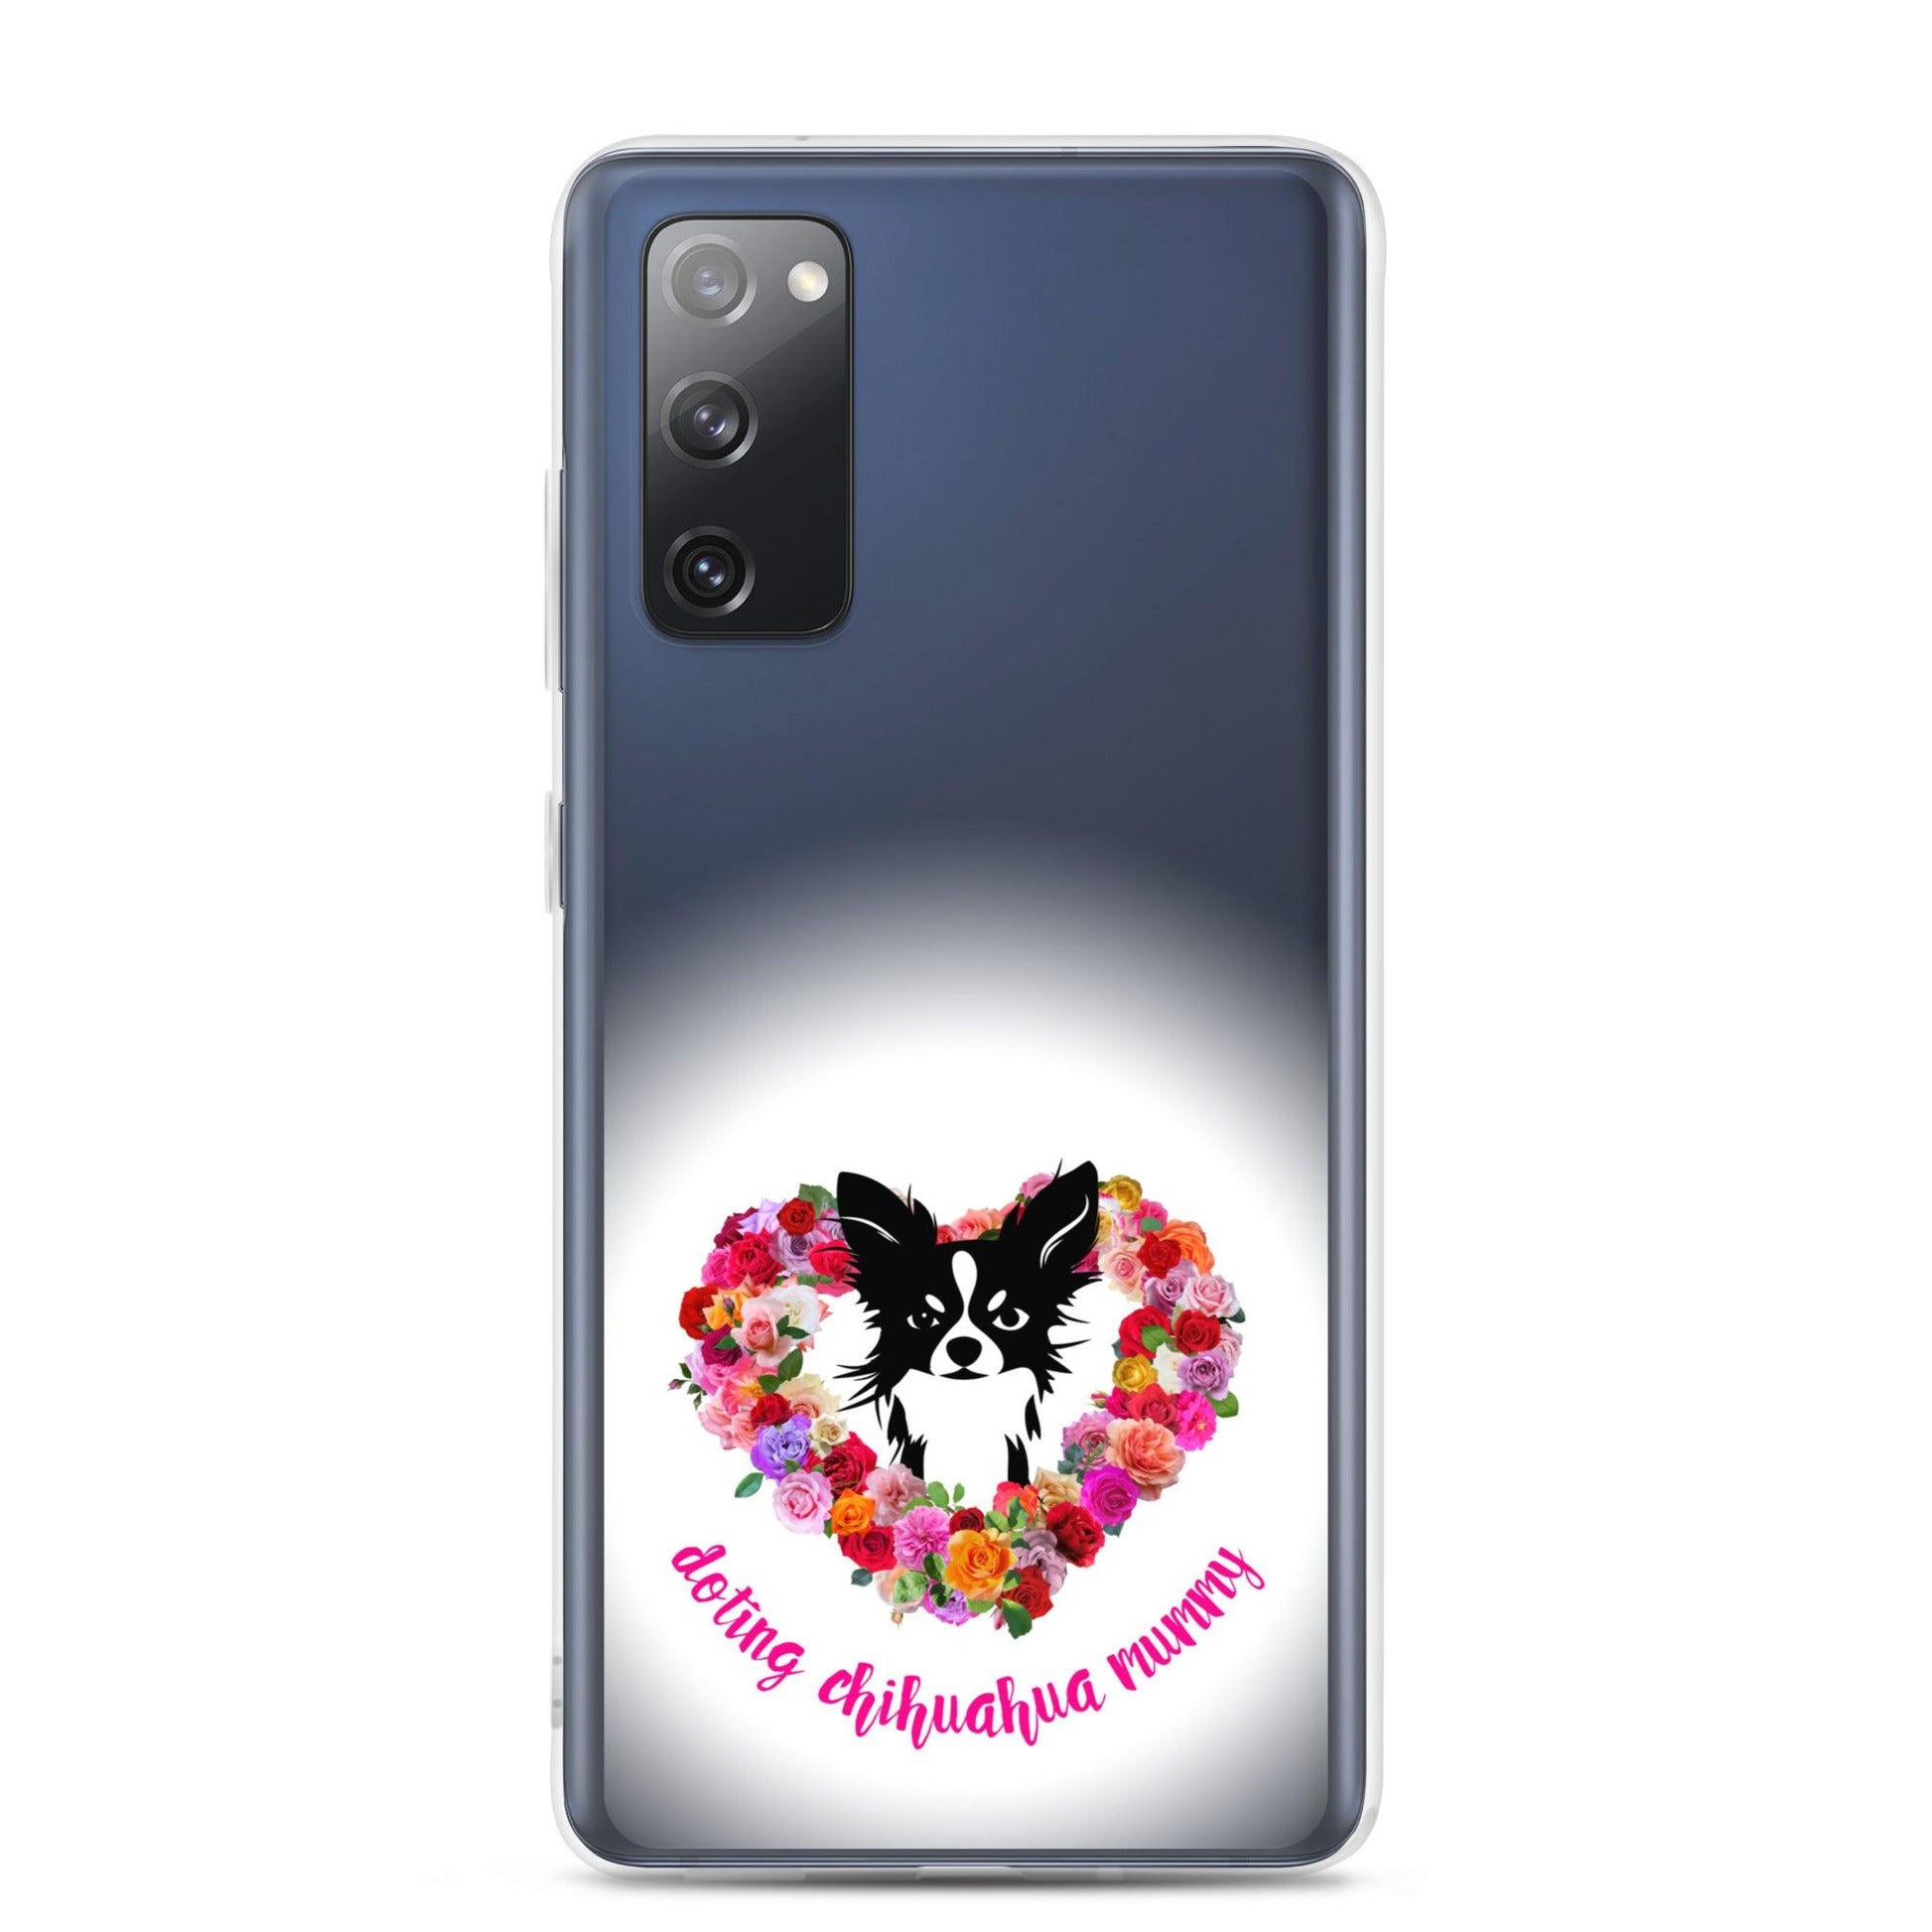 There's something so special about the bond between a girl and her chi baby. These cute little dogs charm their way deep into their mum's heart. Quality iPhone® case with solid back, flexible sides and precisely aligned port openings. The design features a black and white longhaired chihuahua surrounded by a lush heart-shaped rose garland, and the words "doting chihuahua mummy" - an adorable Mother's Day / birthday / Christmas gift for a doting chihuahua mummy. Design by Renate Kriegler for Chimigos.